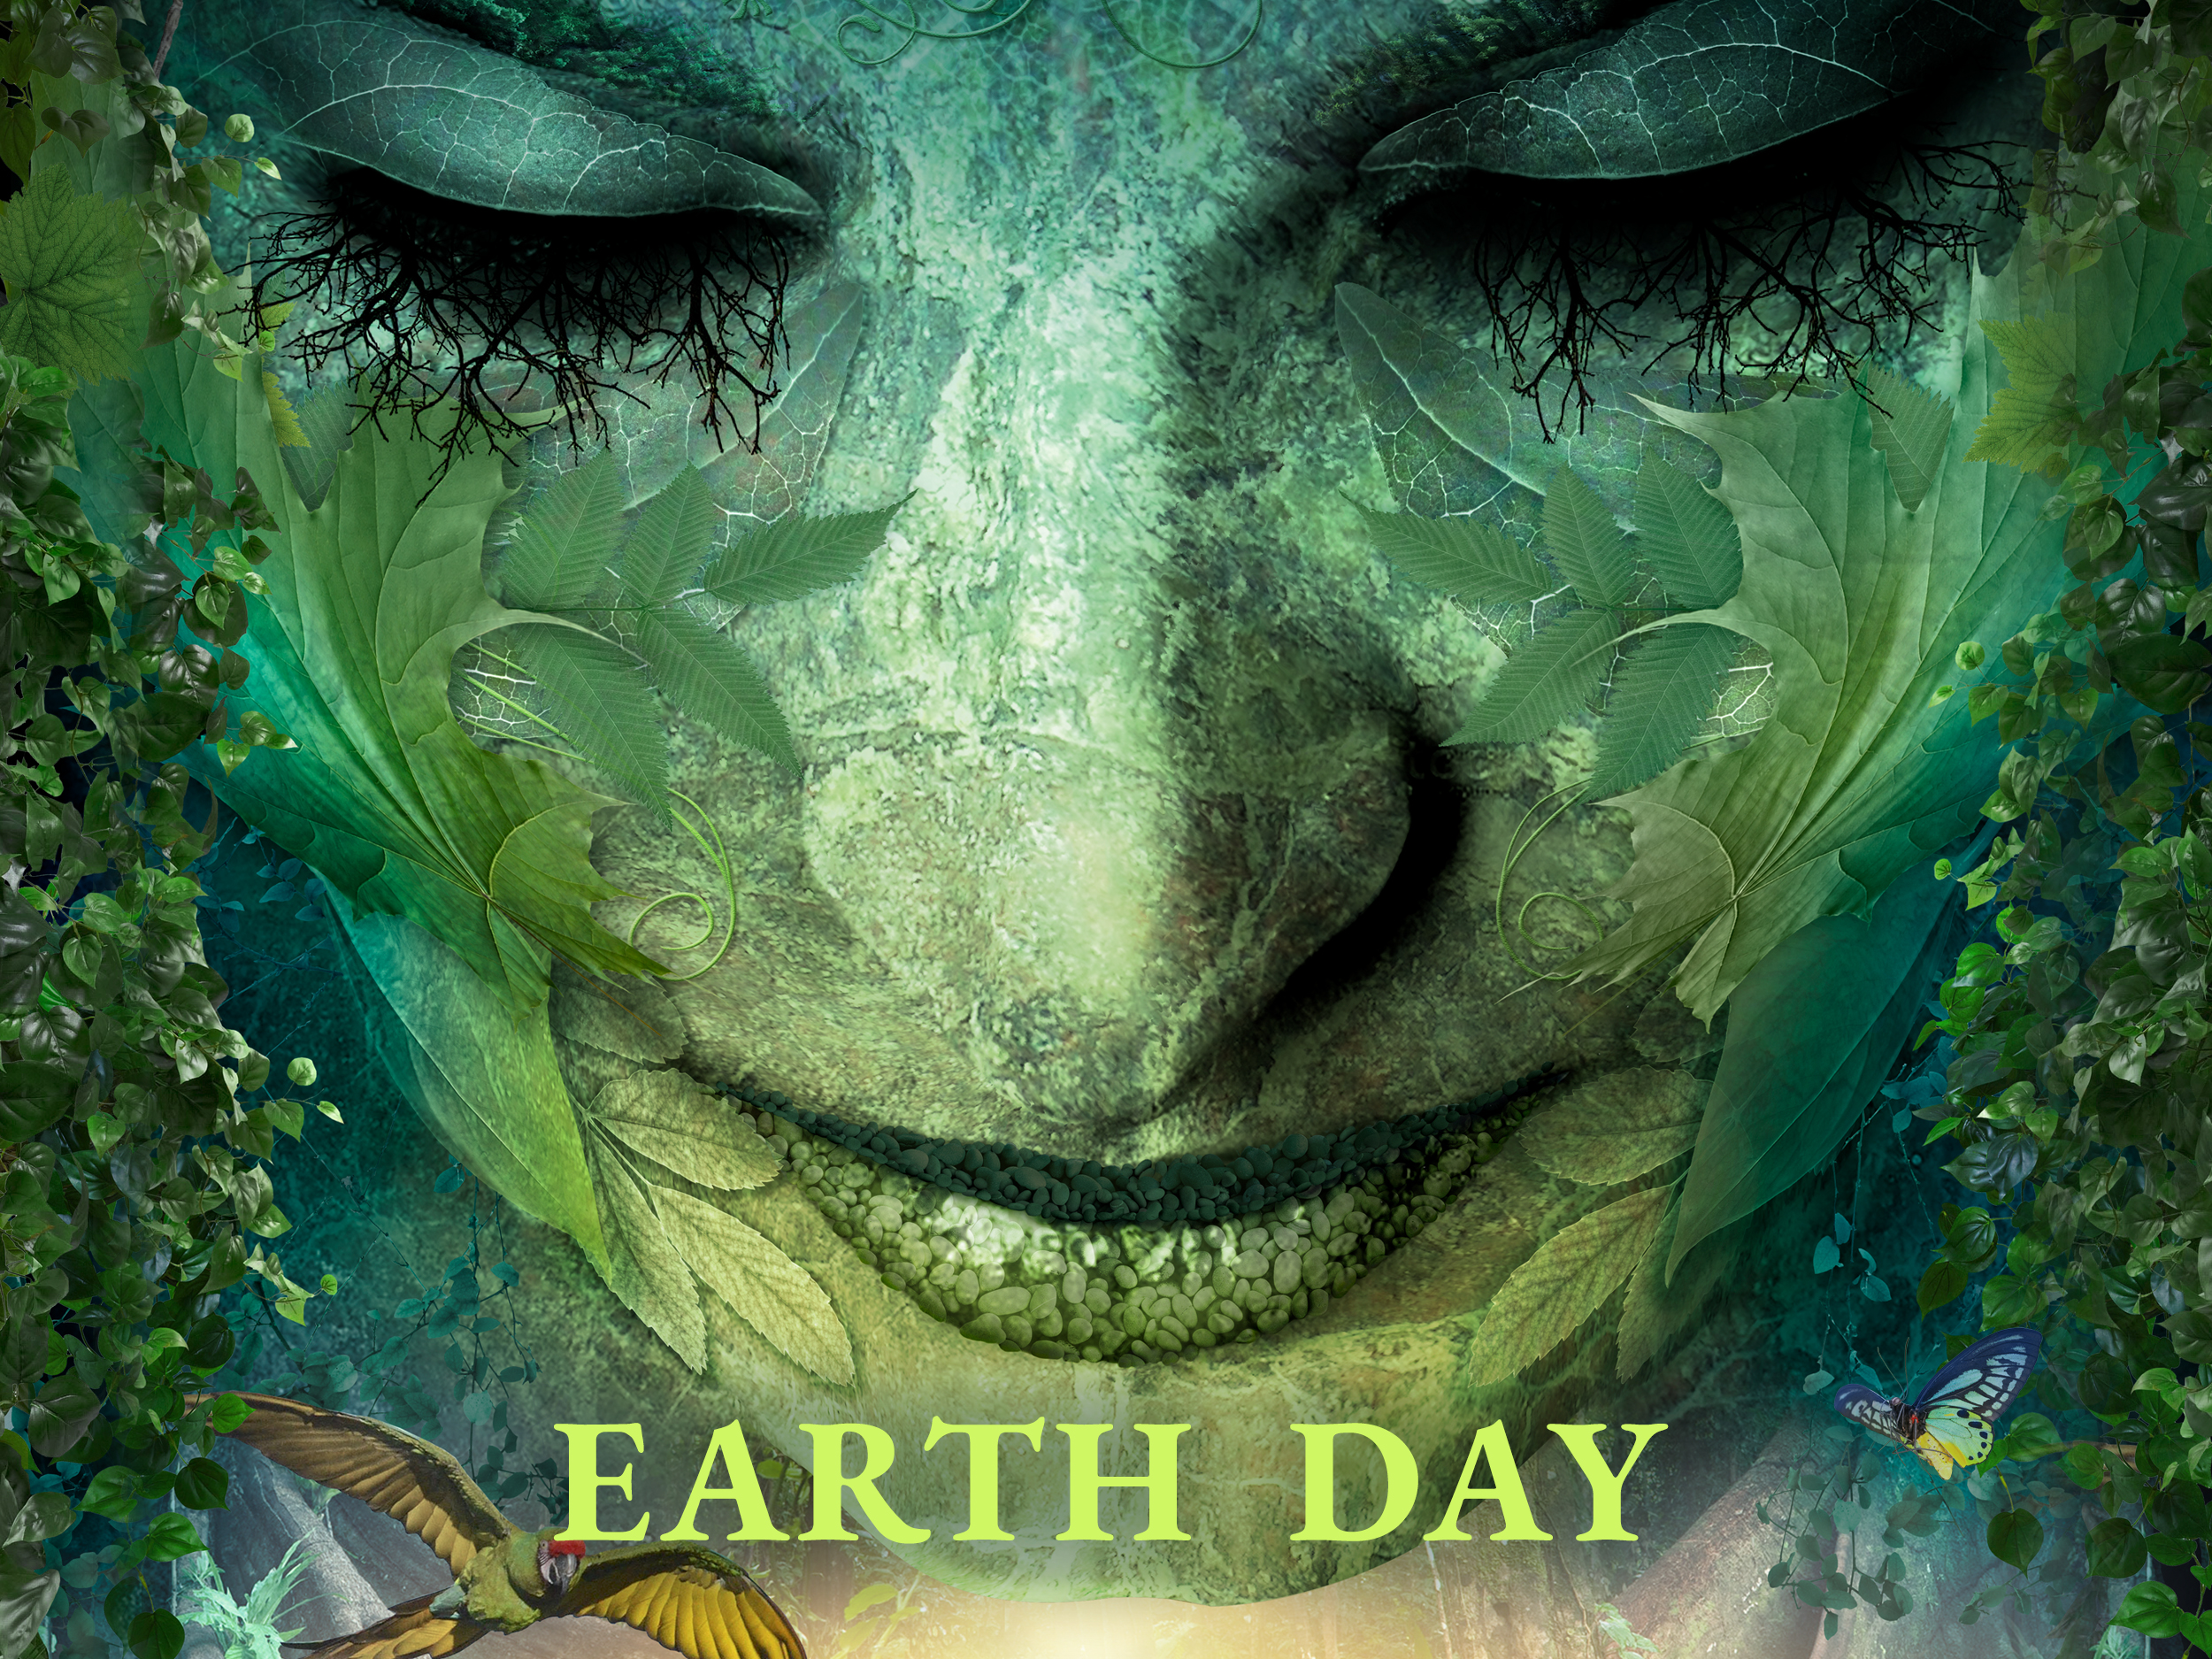 Earth Day 2016 poster